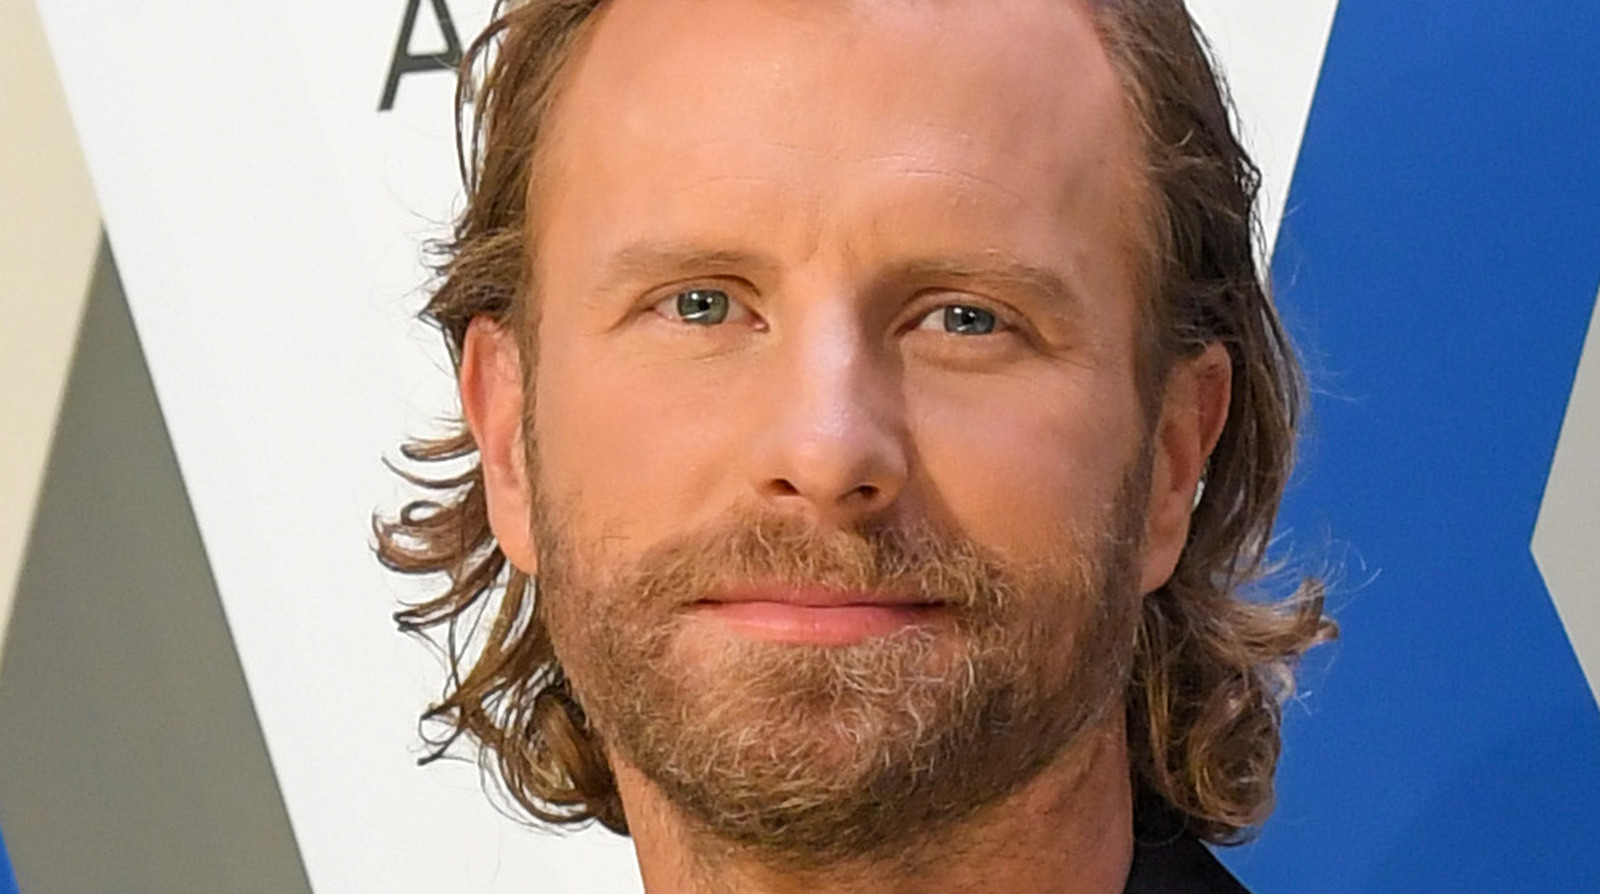 Here's What Dierks Bentley's Gone Really Means